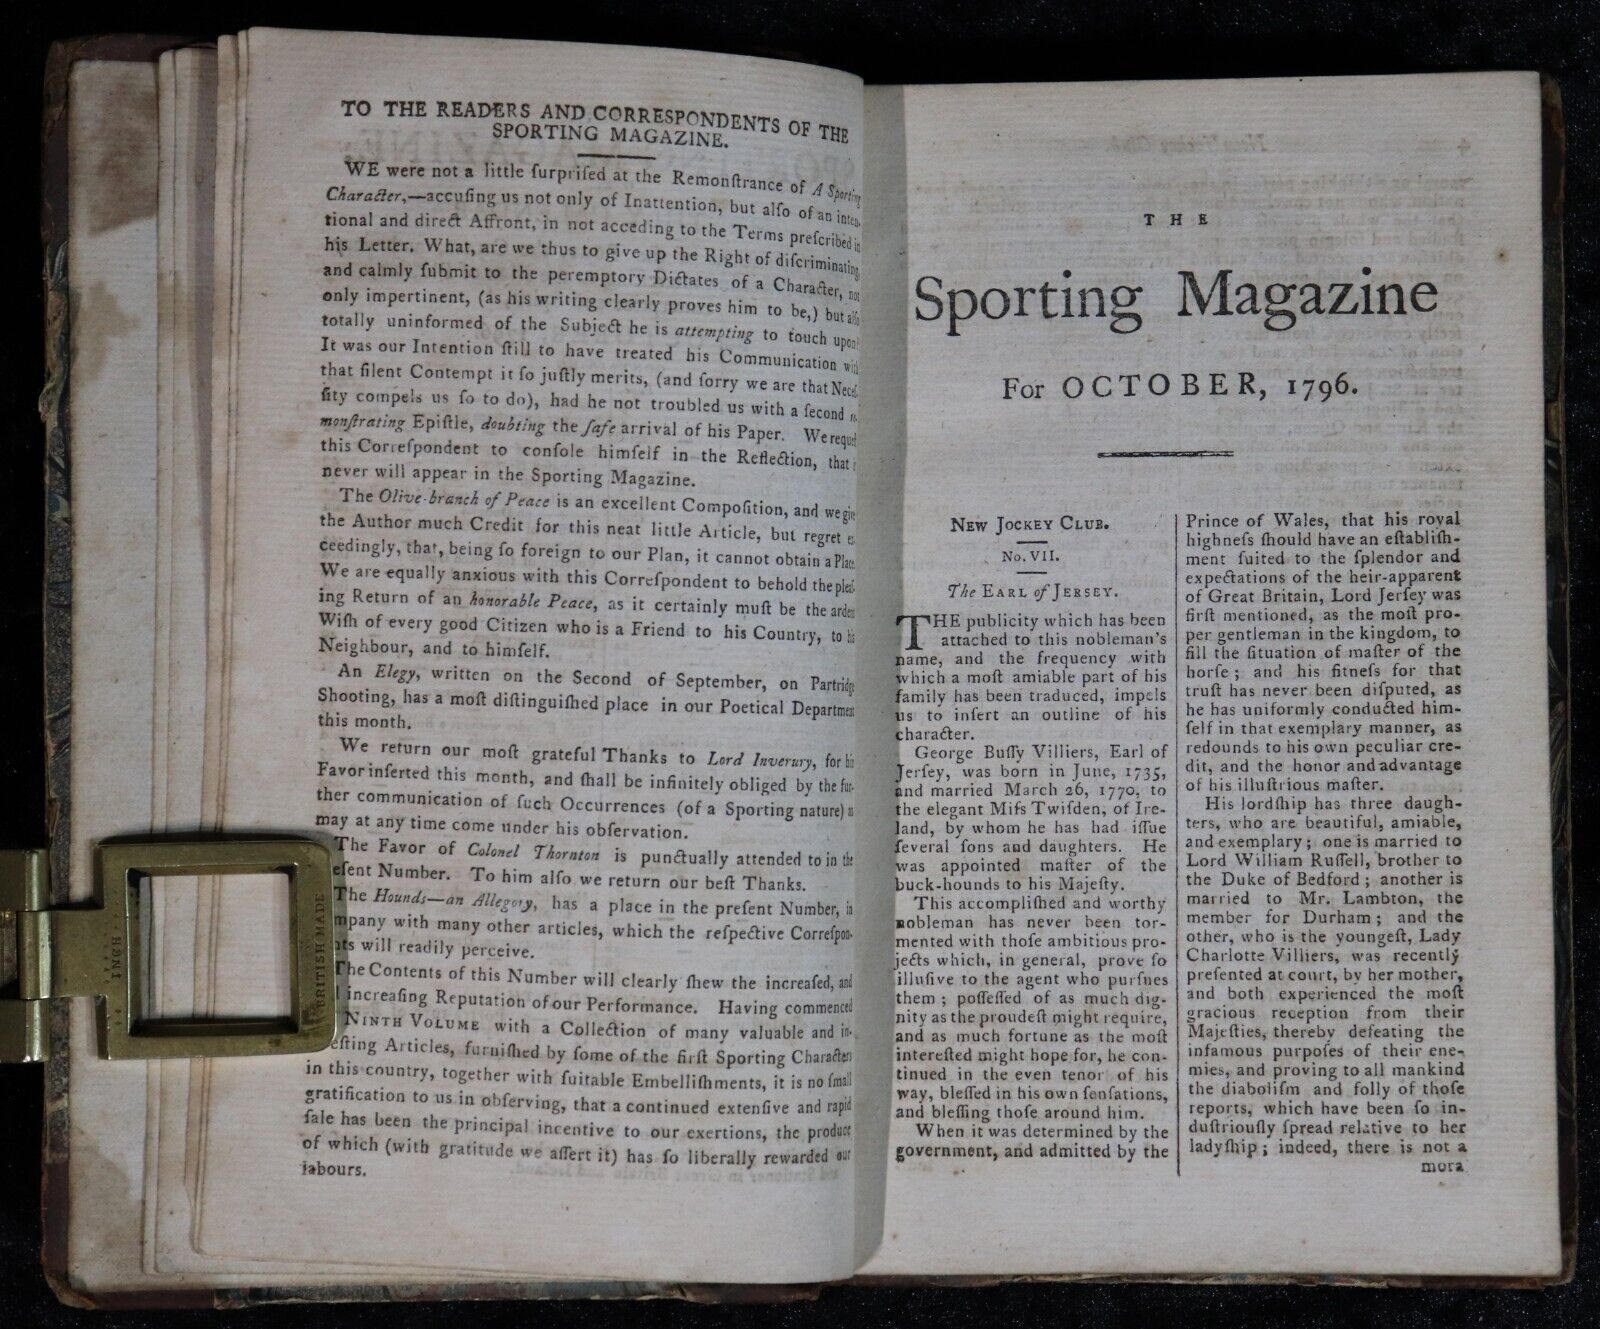 The Sporting Magazine: Monthly Calendar - 1797 - Antiquarian Sport History Book